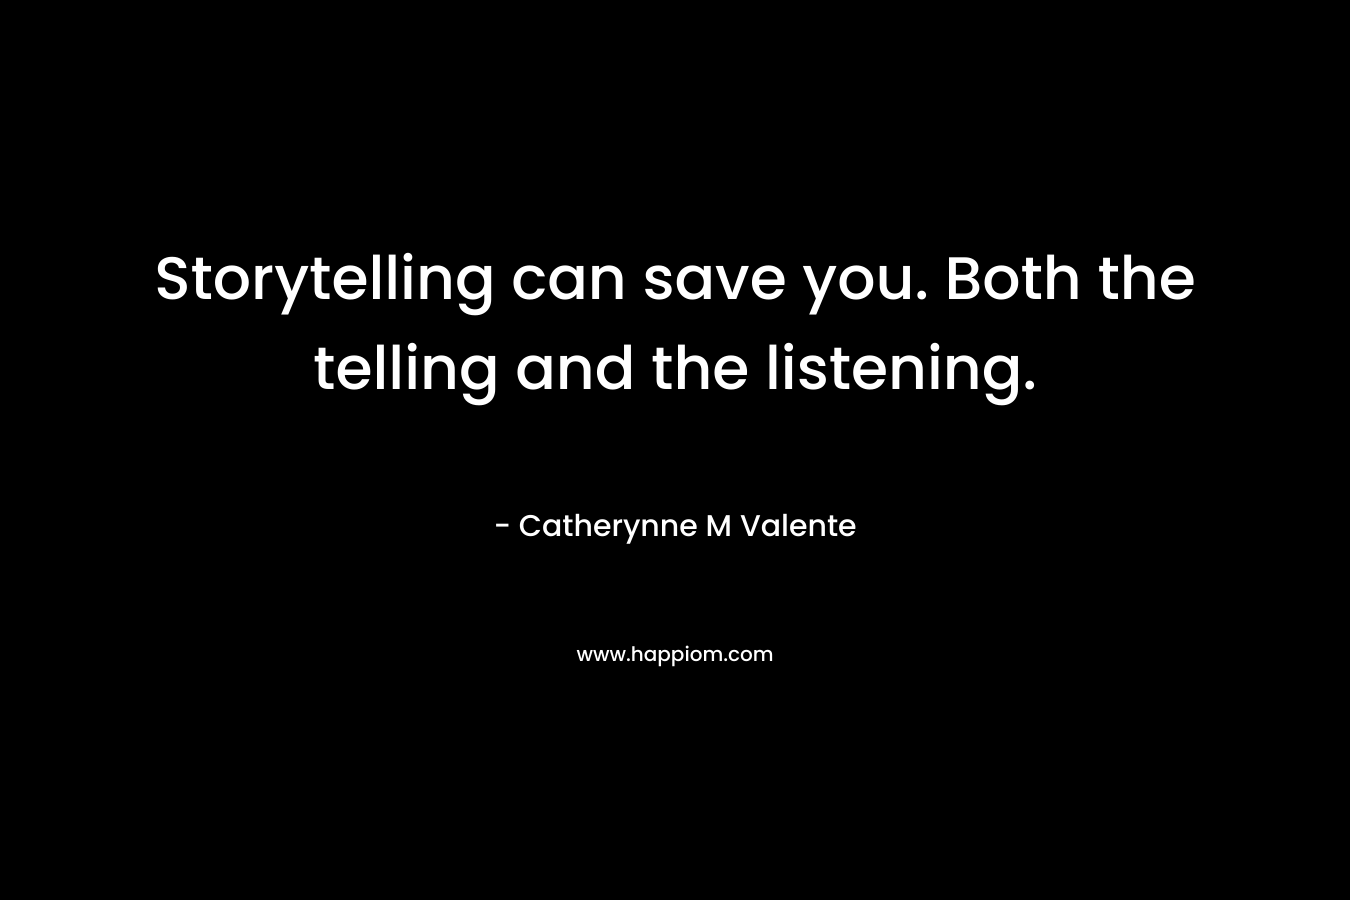 Storytelling can save you. Both the telling and the listening. – Catherynne M Valente